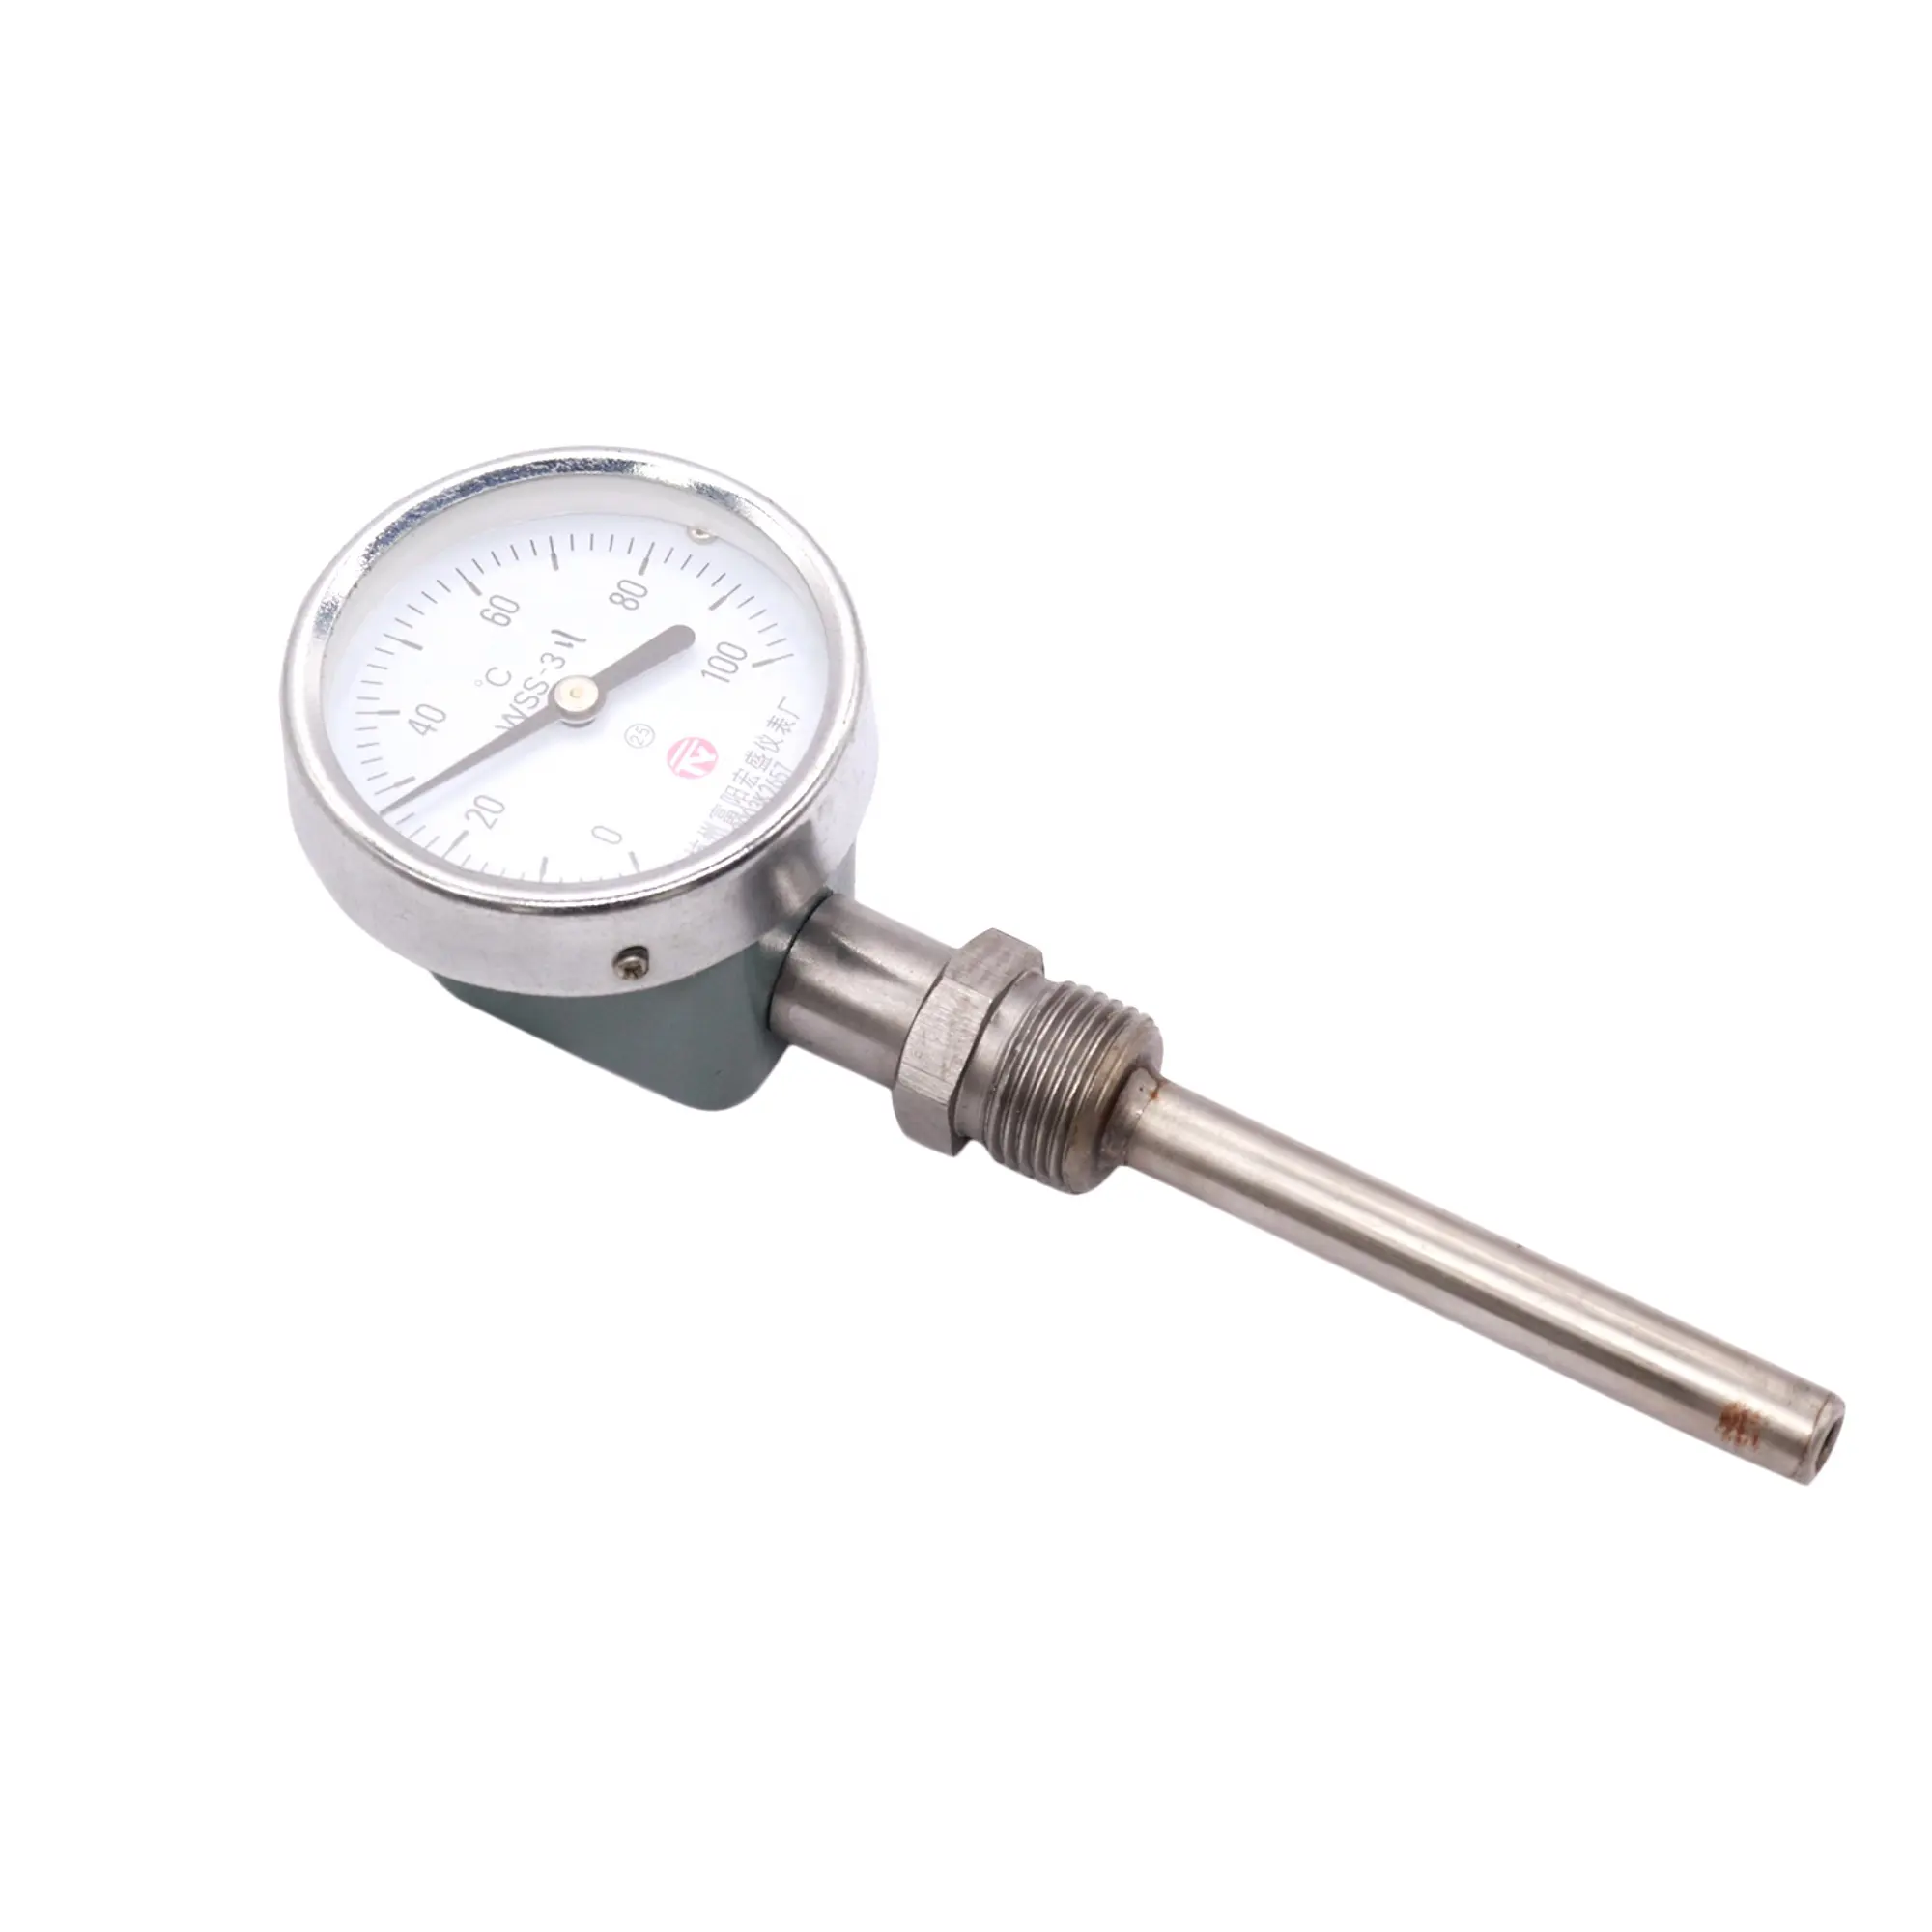 Radil Direction type Thermometer Series Industrial Bimetallic Thermometer thermometer bimetallic temperature indicator WSS-311